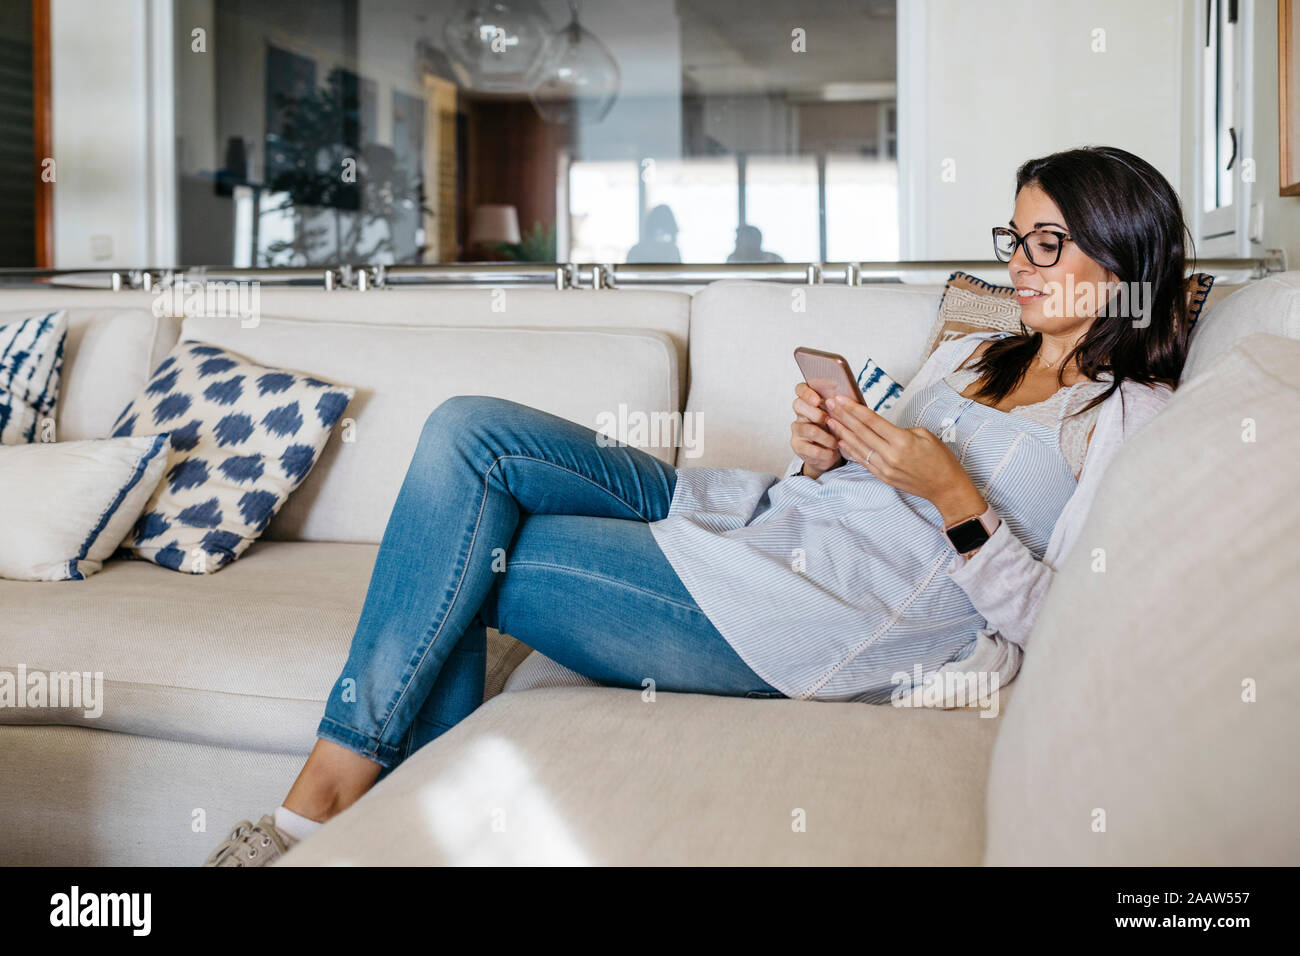 Smiling woman at home sitting on couch looking at cell phone Stock Photo